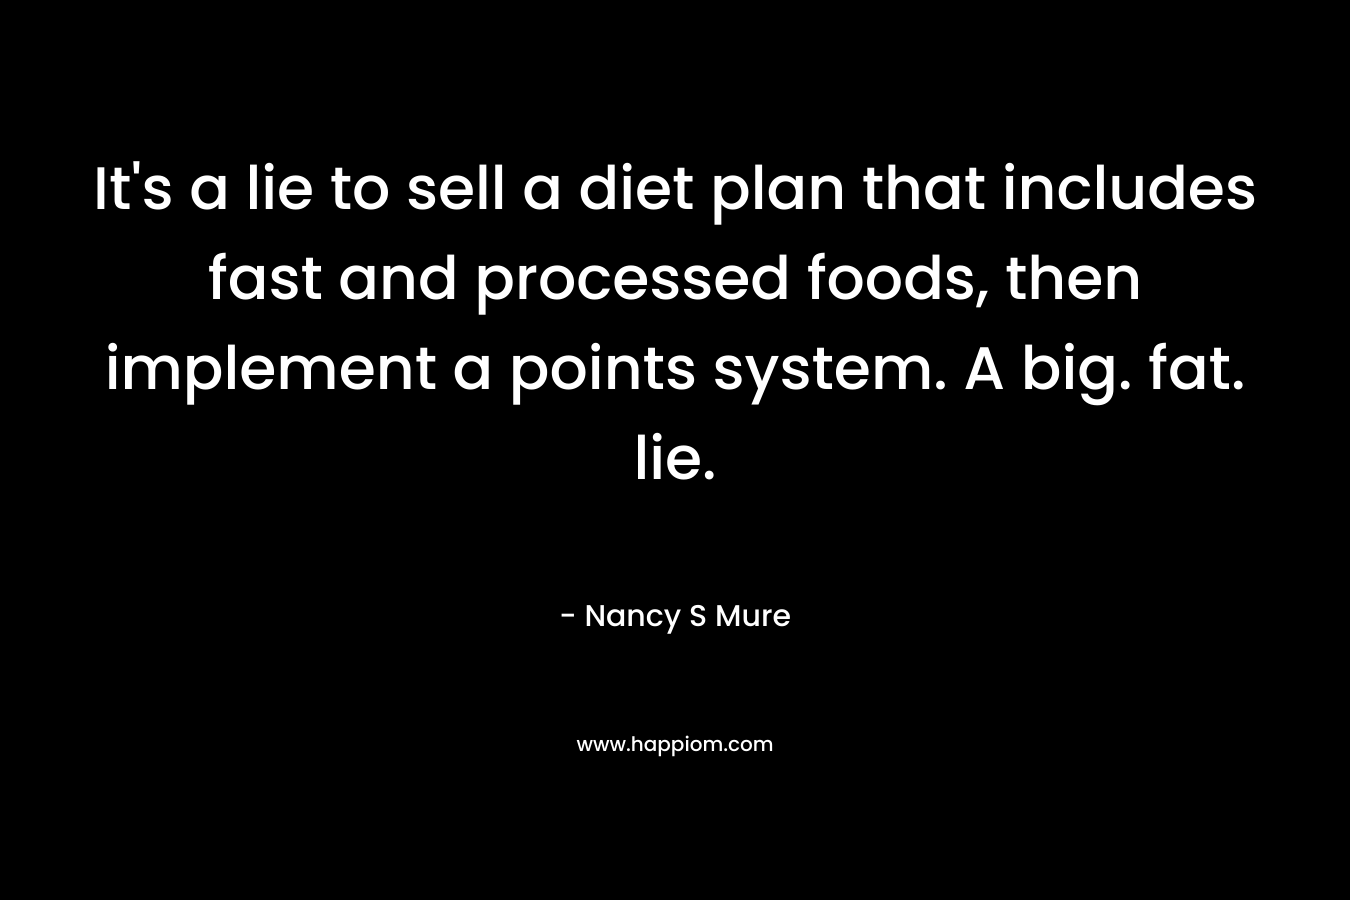 It’s a lie to sell a diet plan that includes fast and processed foods, then implement a points system. A big. fat. lie. – Nancy S Mure